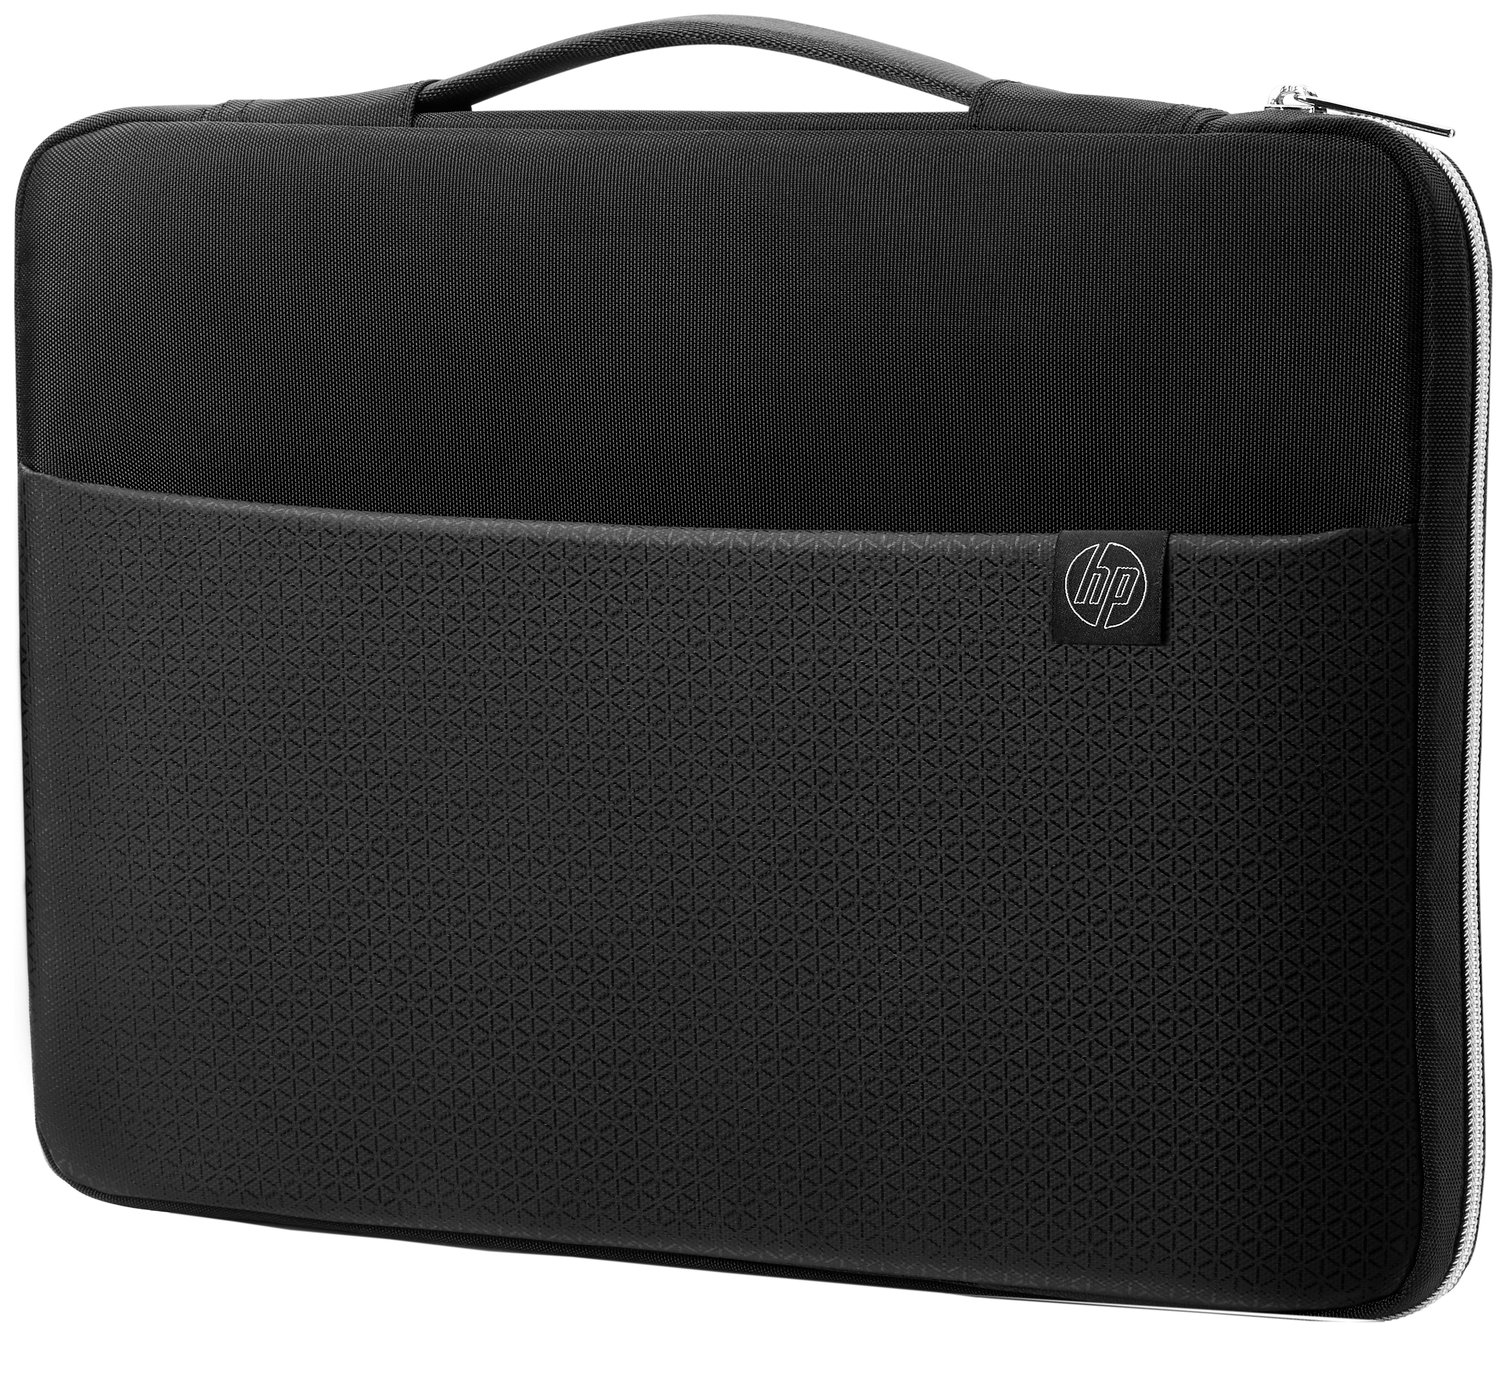 HP 14 Inch Laptop Sleeve - Black and Silver